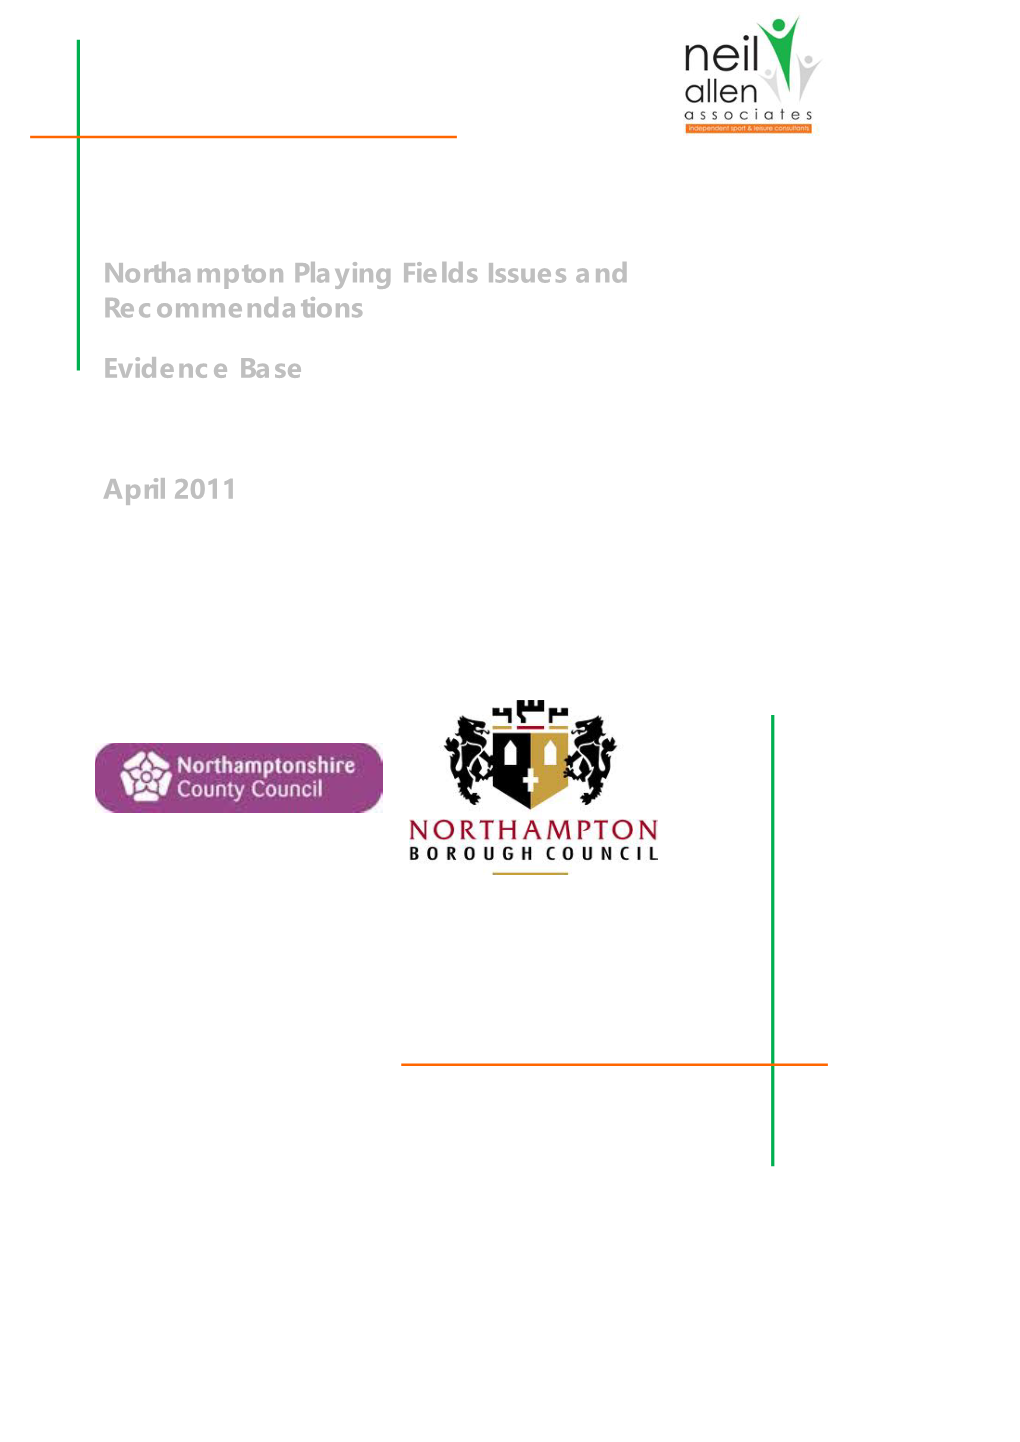 Northampton Playing Fields Issues and Recommendations Evidence Base April 2011